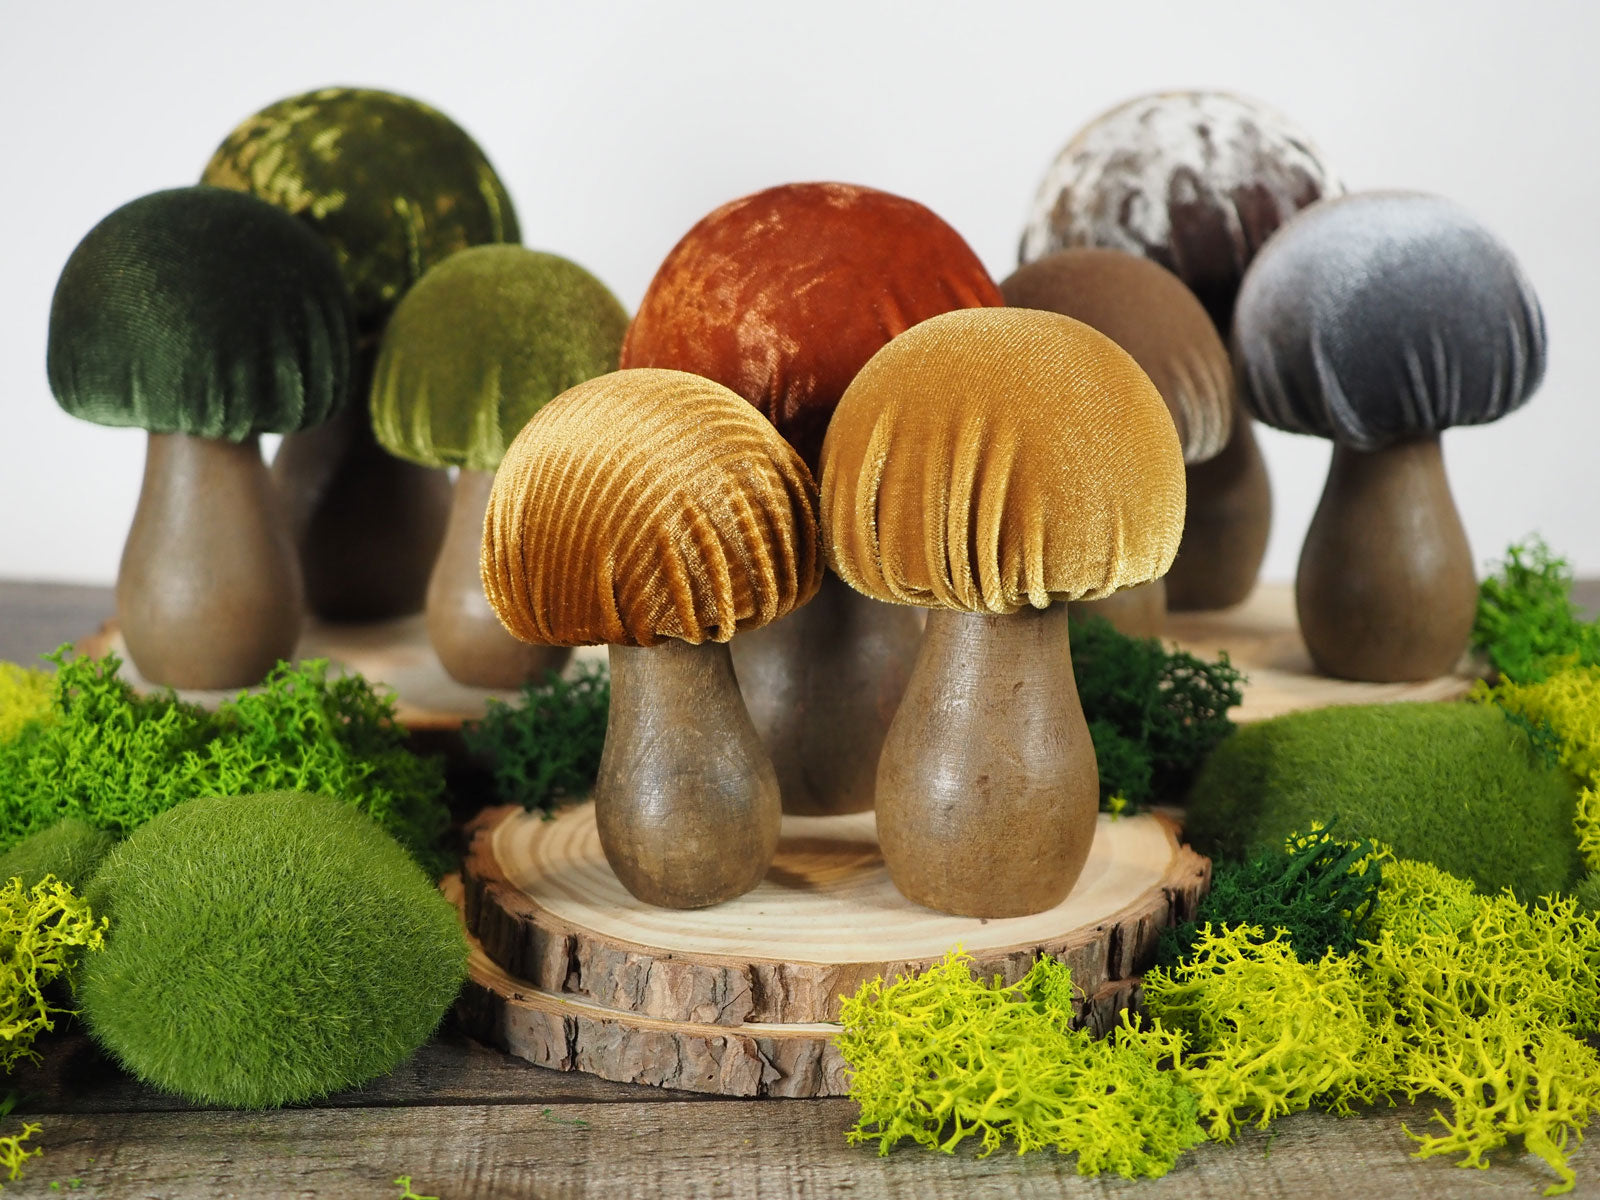 9 hand-made decorative mushrooms with different shades of velvet tops and wooden bases